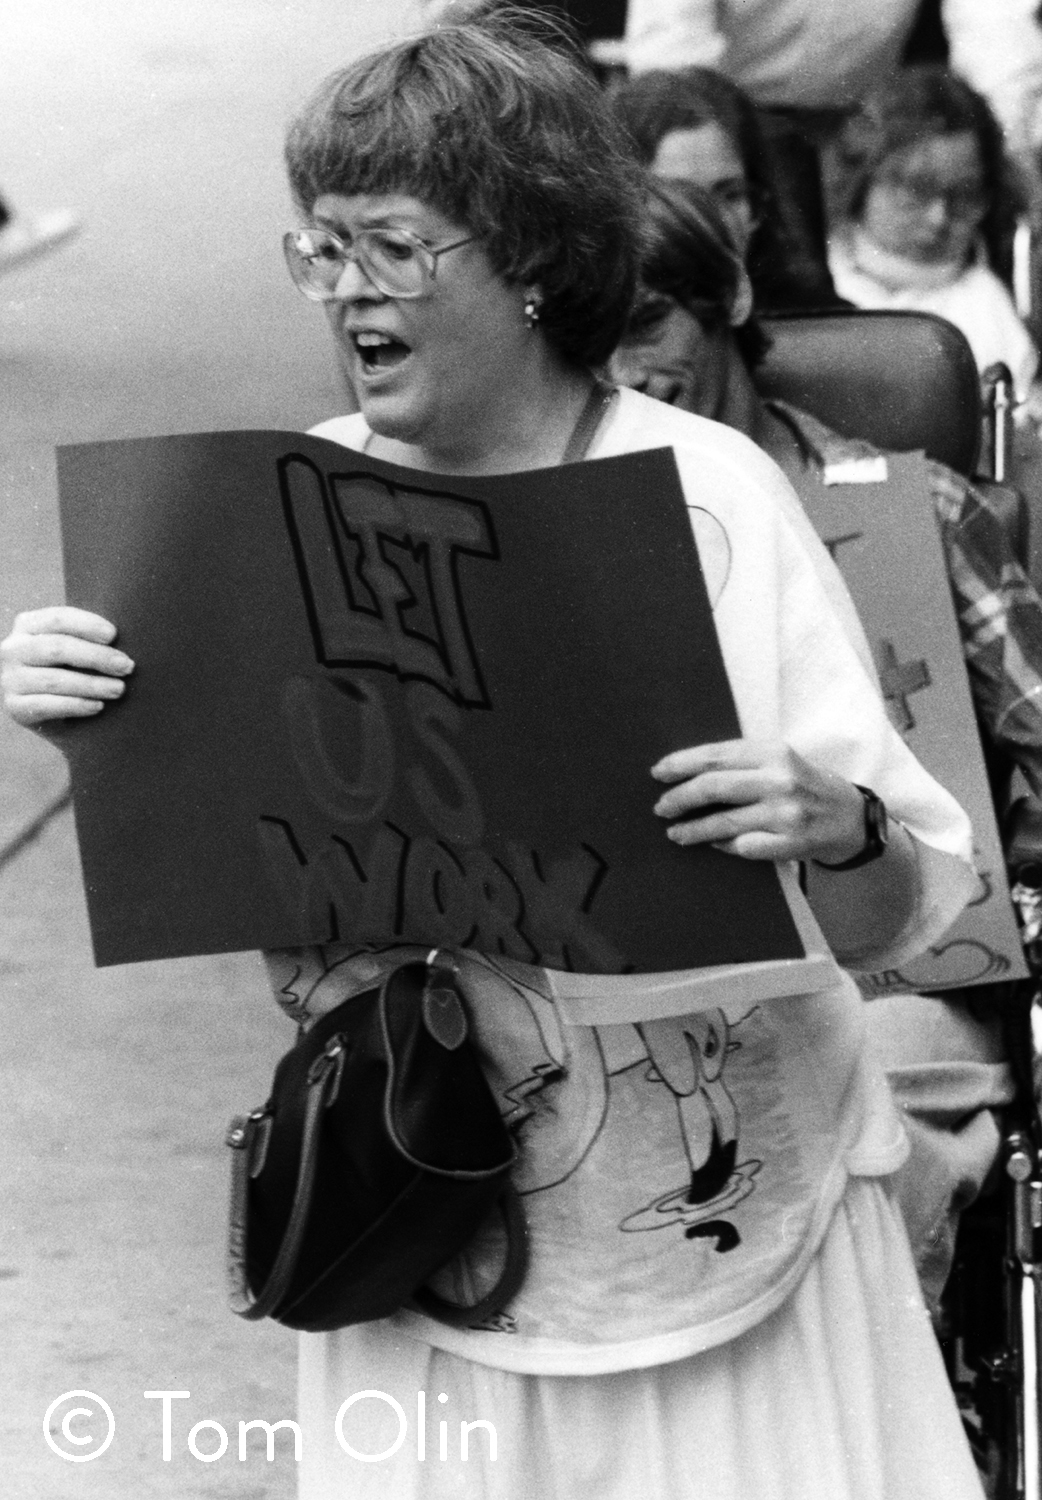 Black and white photograph of a woman protesting. She’s holding a handmade sign that reads “Let us work”